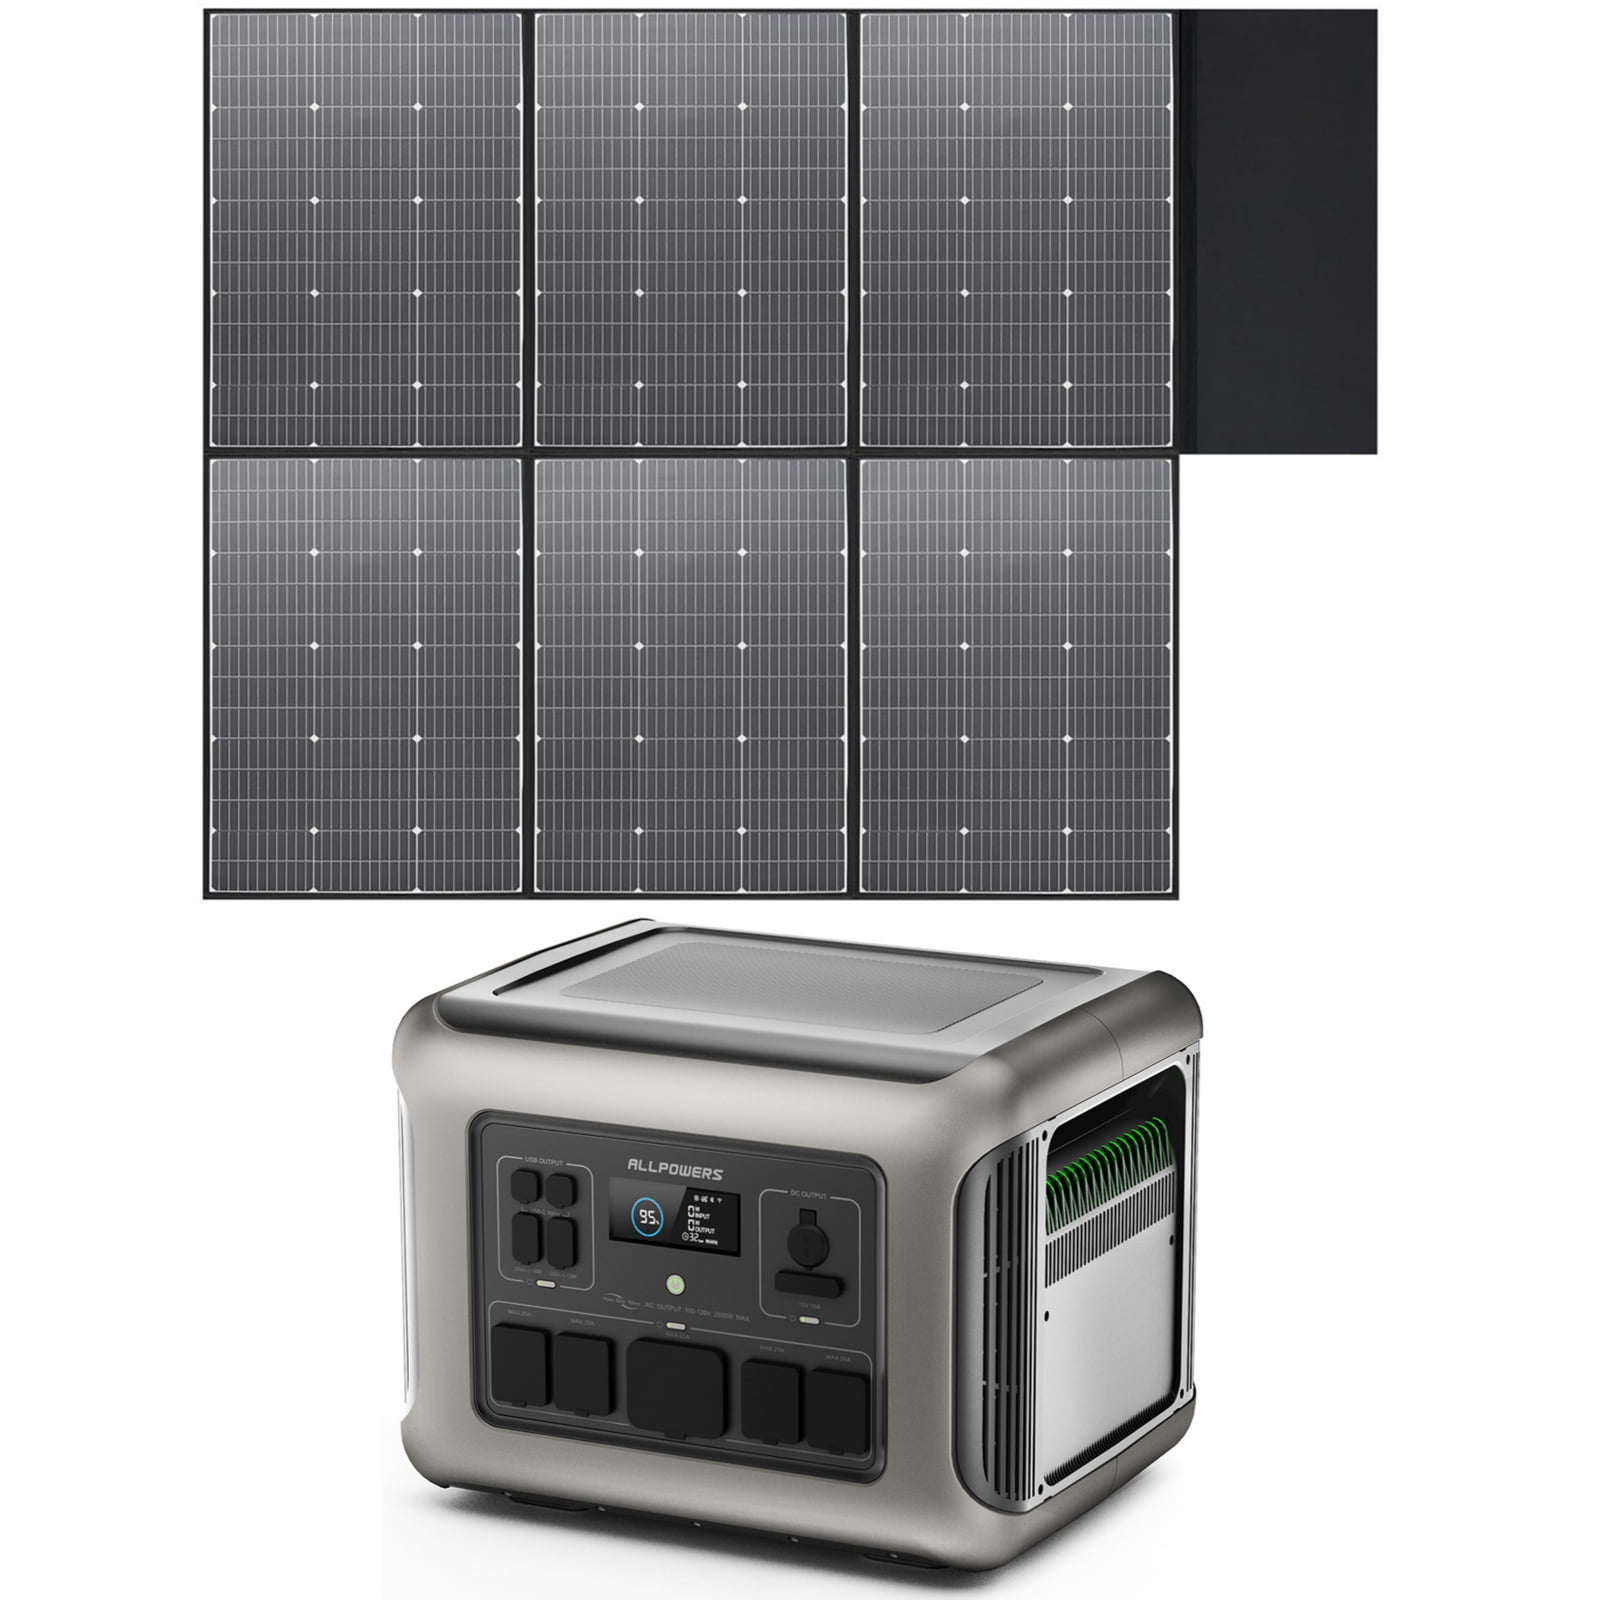 AllPowers Portable Power Station & Solar Panels Review